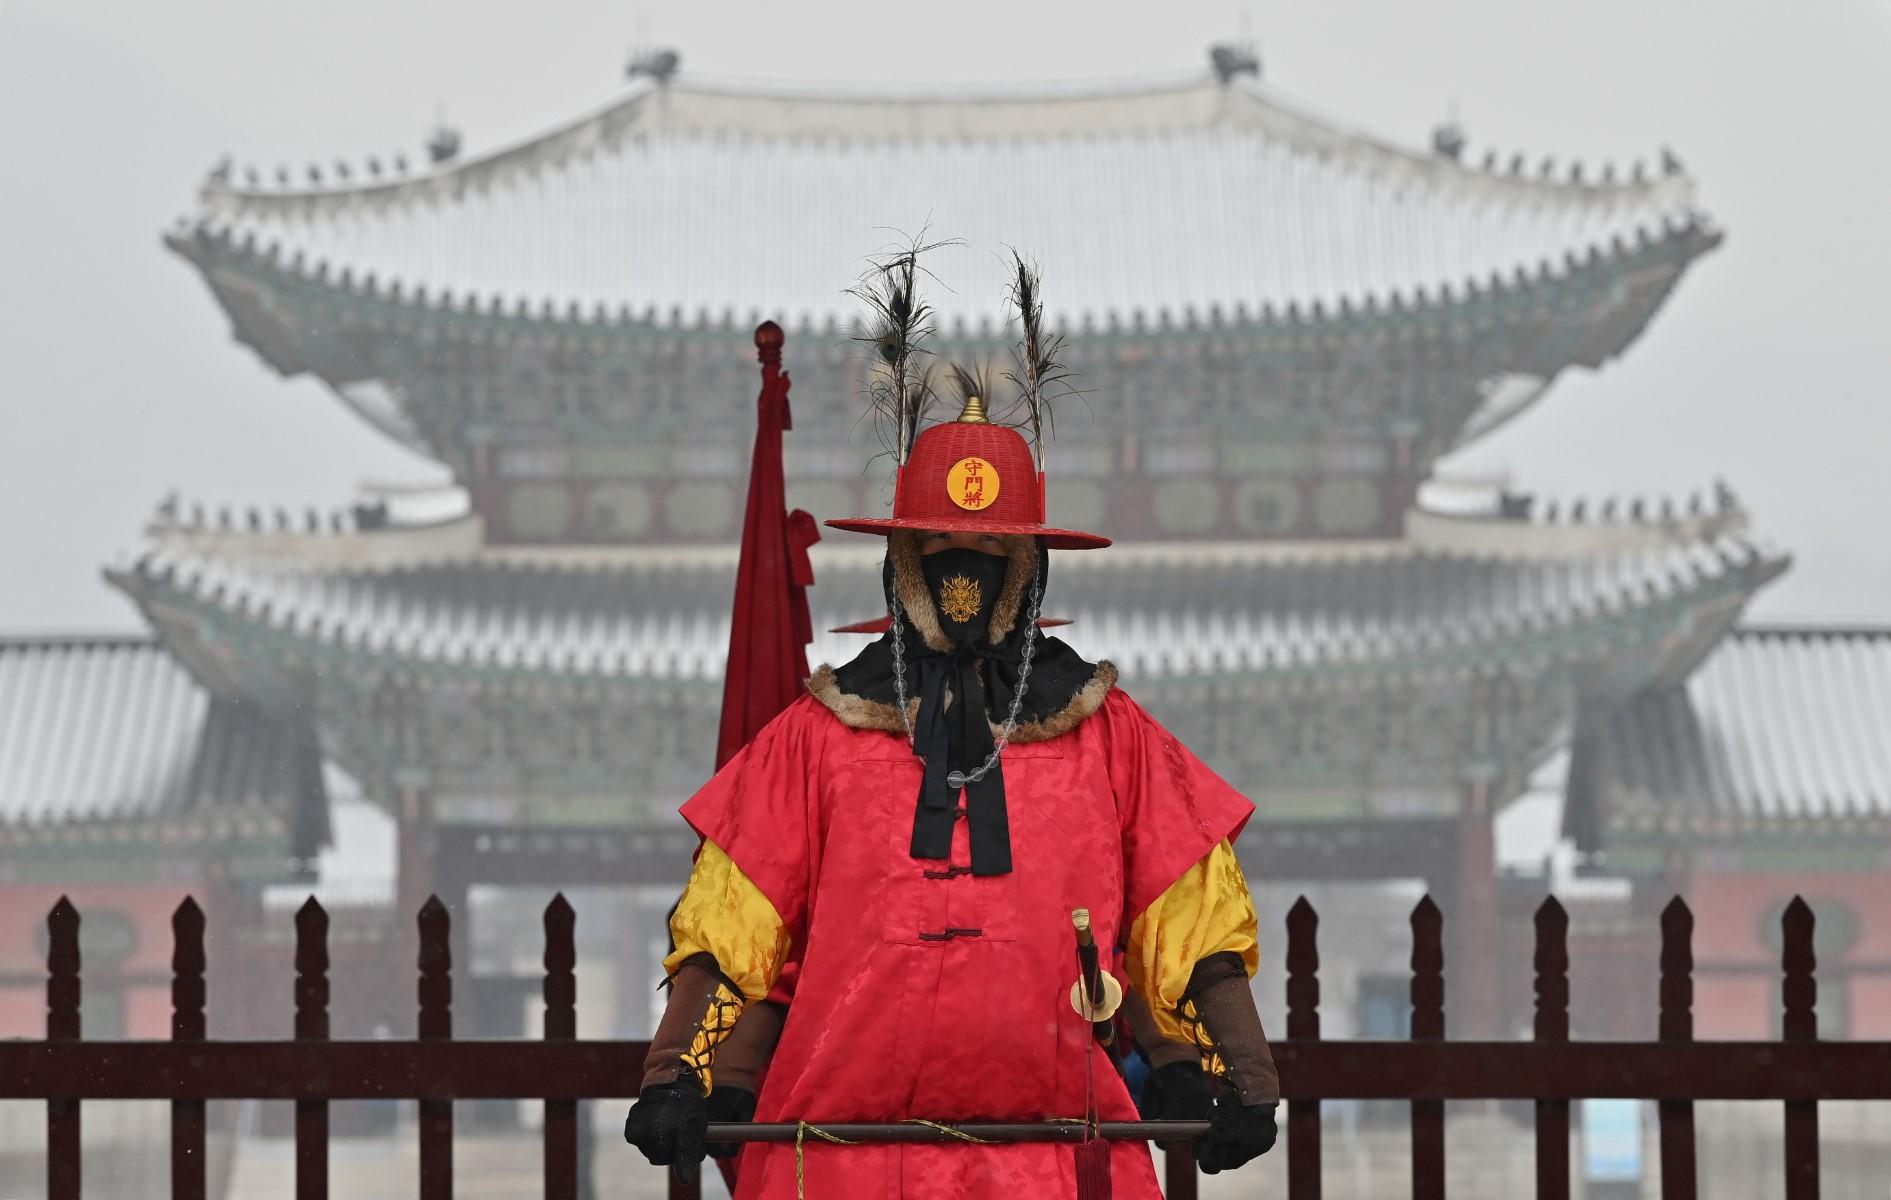 A 'palace guard' stands for tourists in front of the snow-covered Gyeongbokgung Palace in central Seoul on Jan 19. Photo: AFP